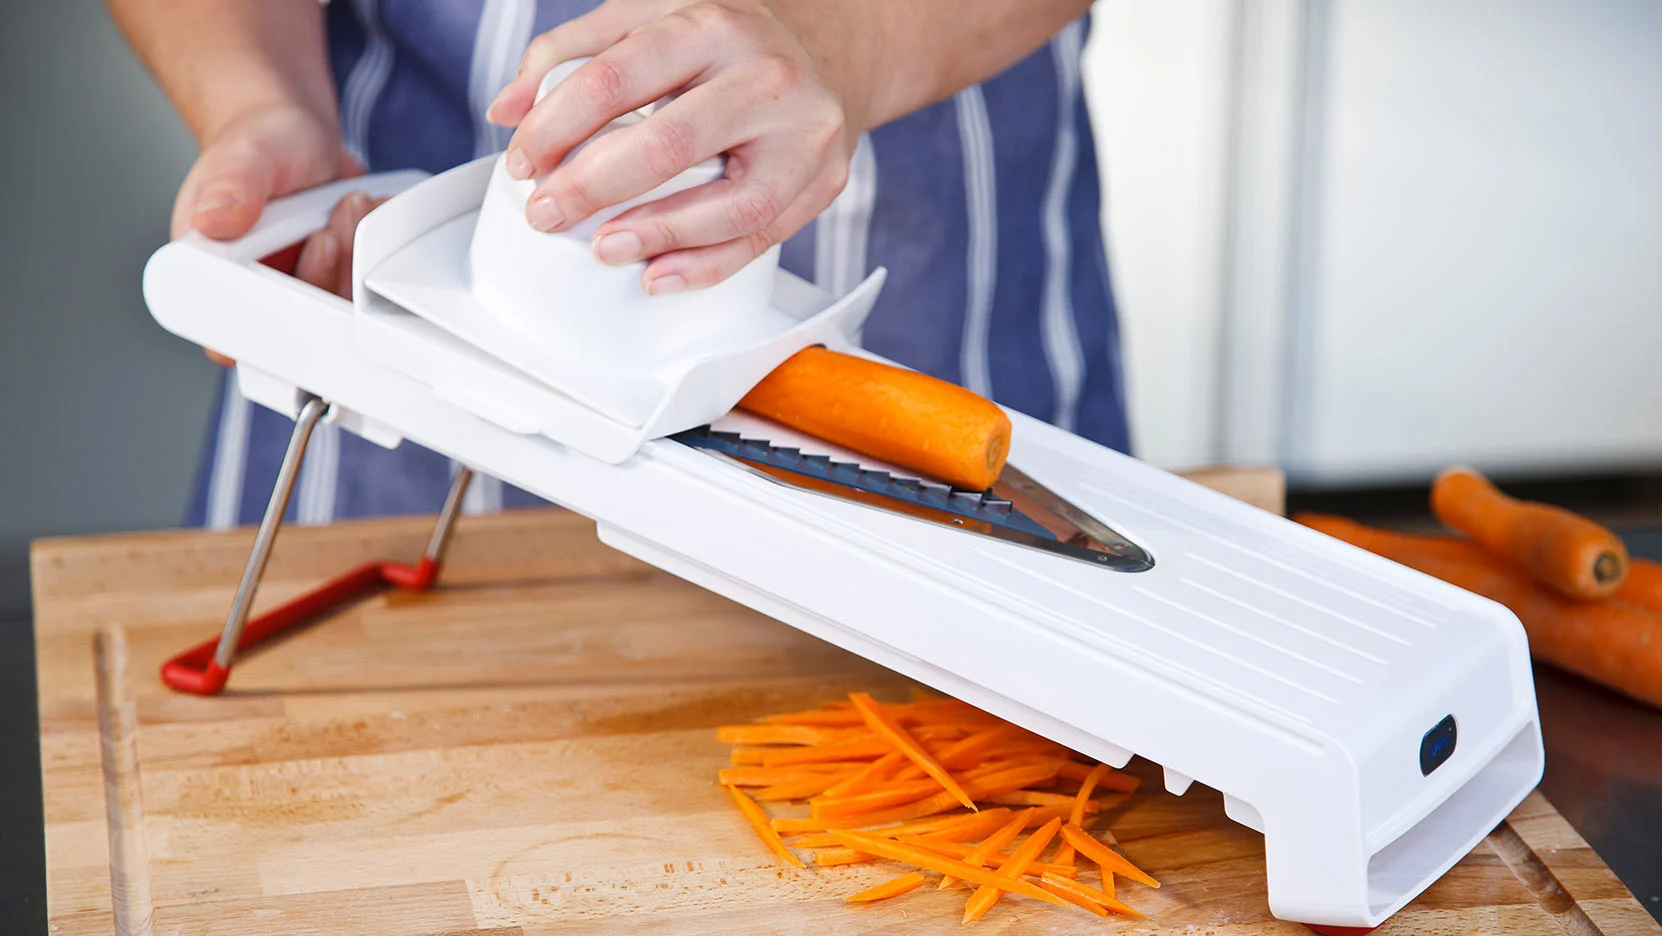 Kitchen Tips: How to Use a Mandolin Slicer Video